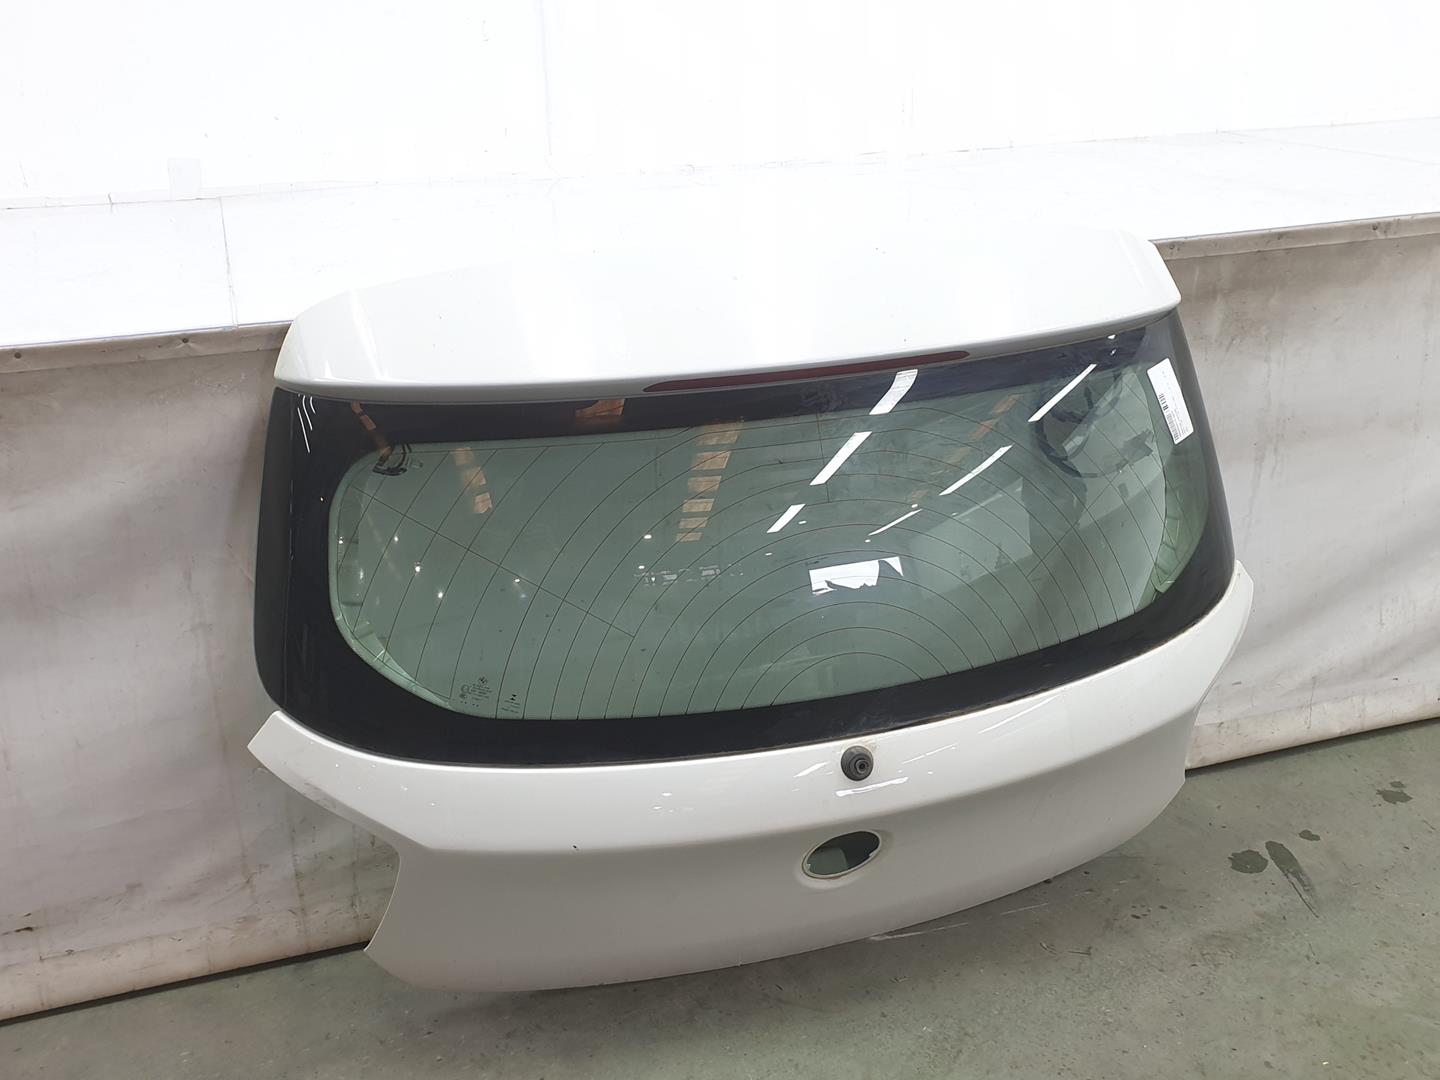 BMW 1 Series F20/F21 (2011-2020) Bootlid Rear Boot 41007305470, 41007305470, COLORBLANCO300 19894068